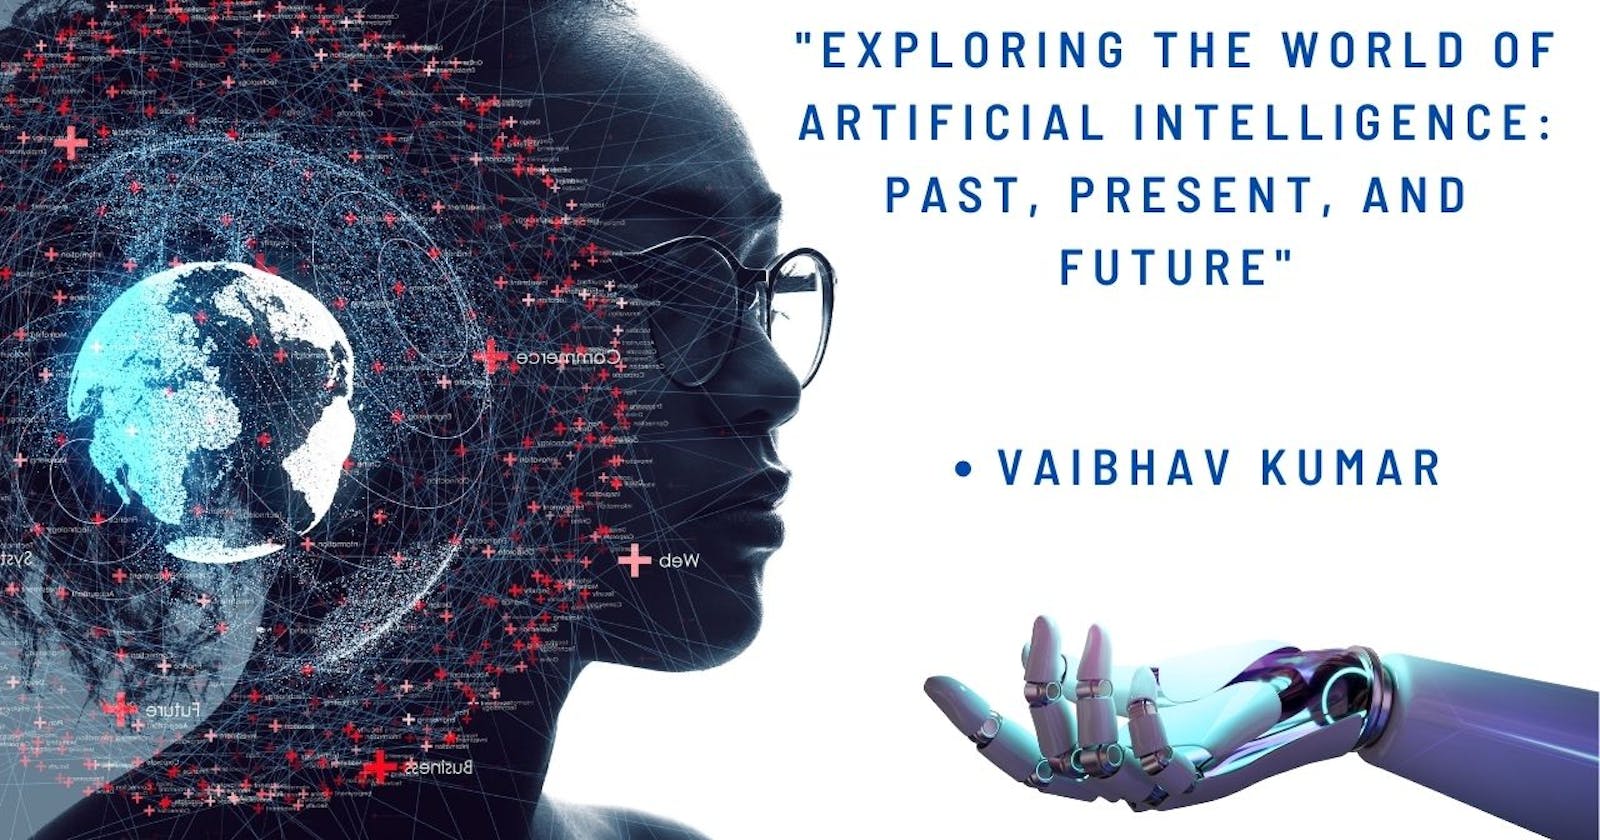 "Exploring the World of Artificial Intelligence: Past, Present, and Future"